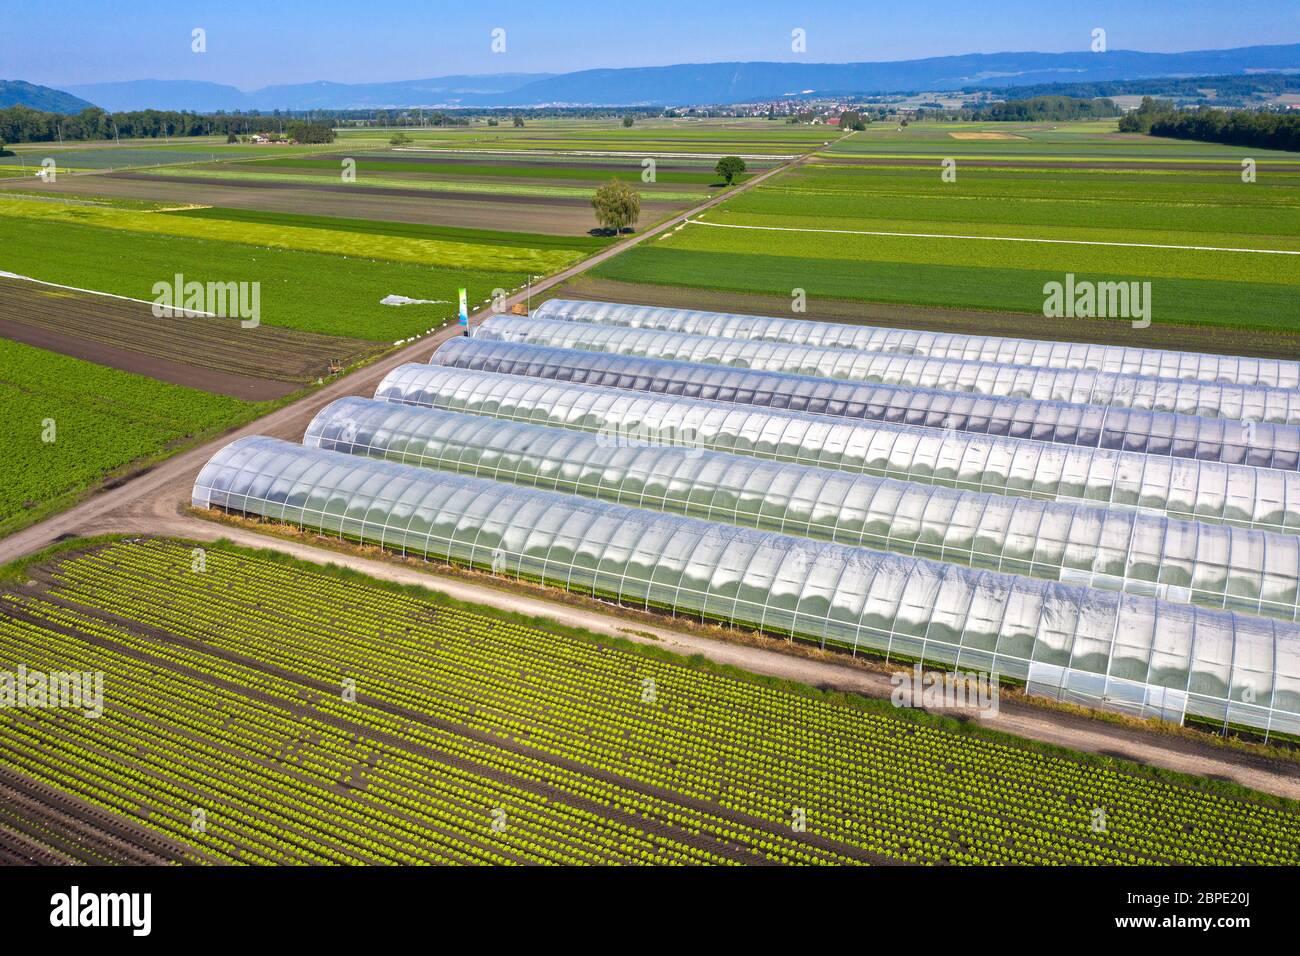 Greenhouses and cropland for the cultivation of vegetables in the vegetable growing area Seeland - Grosses Moos, Kerzers, Switzerland Stock Photo